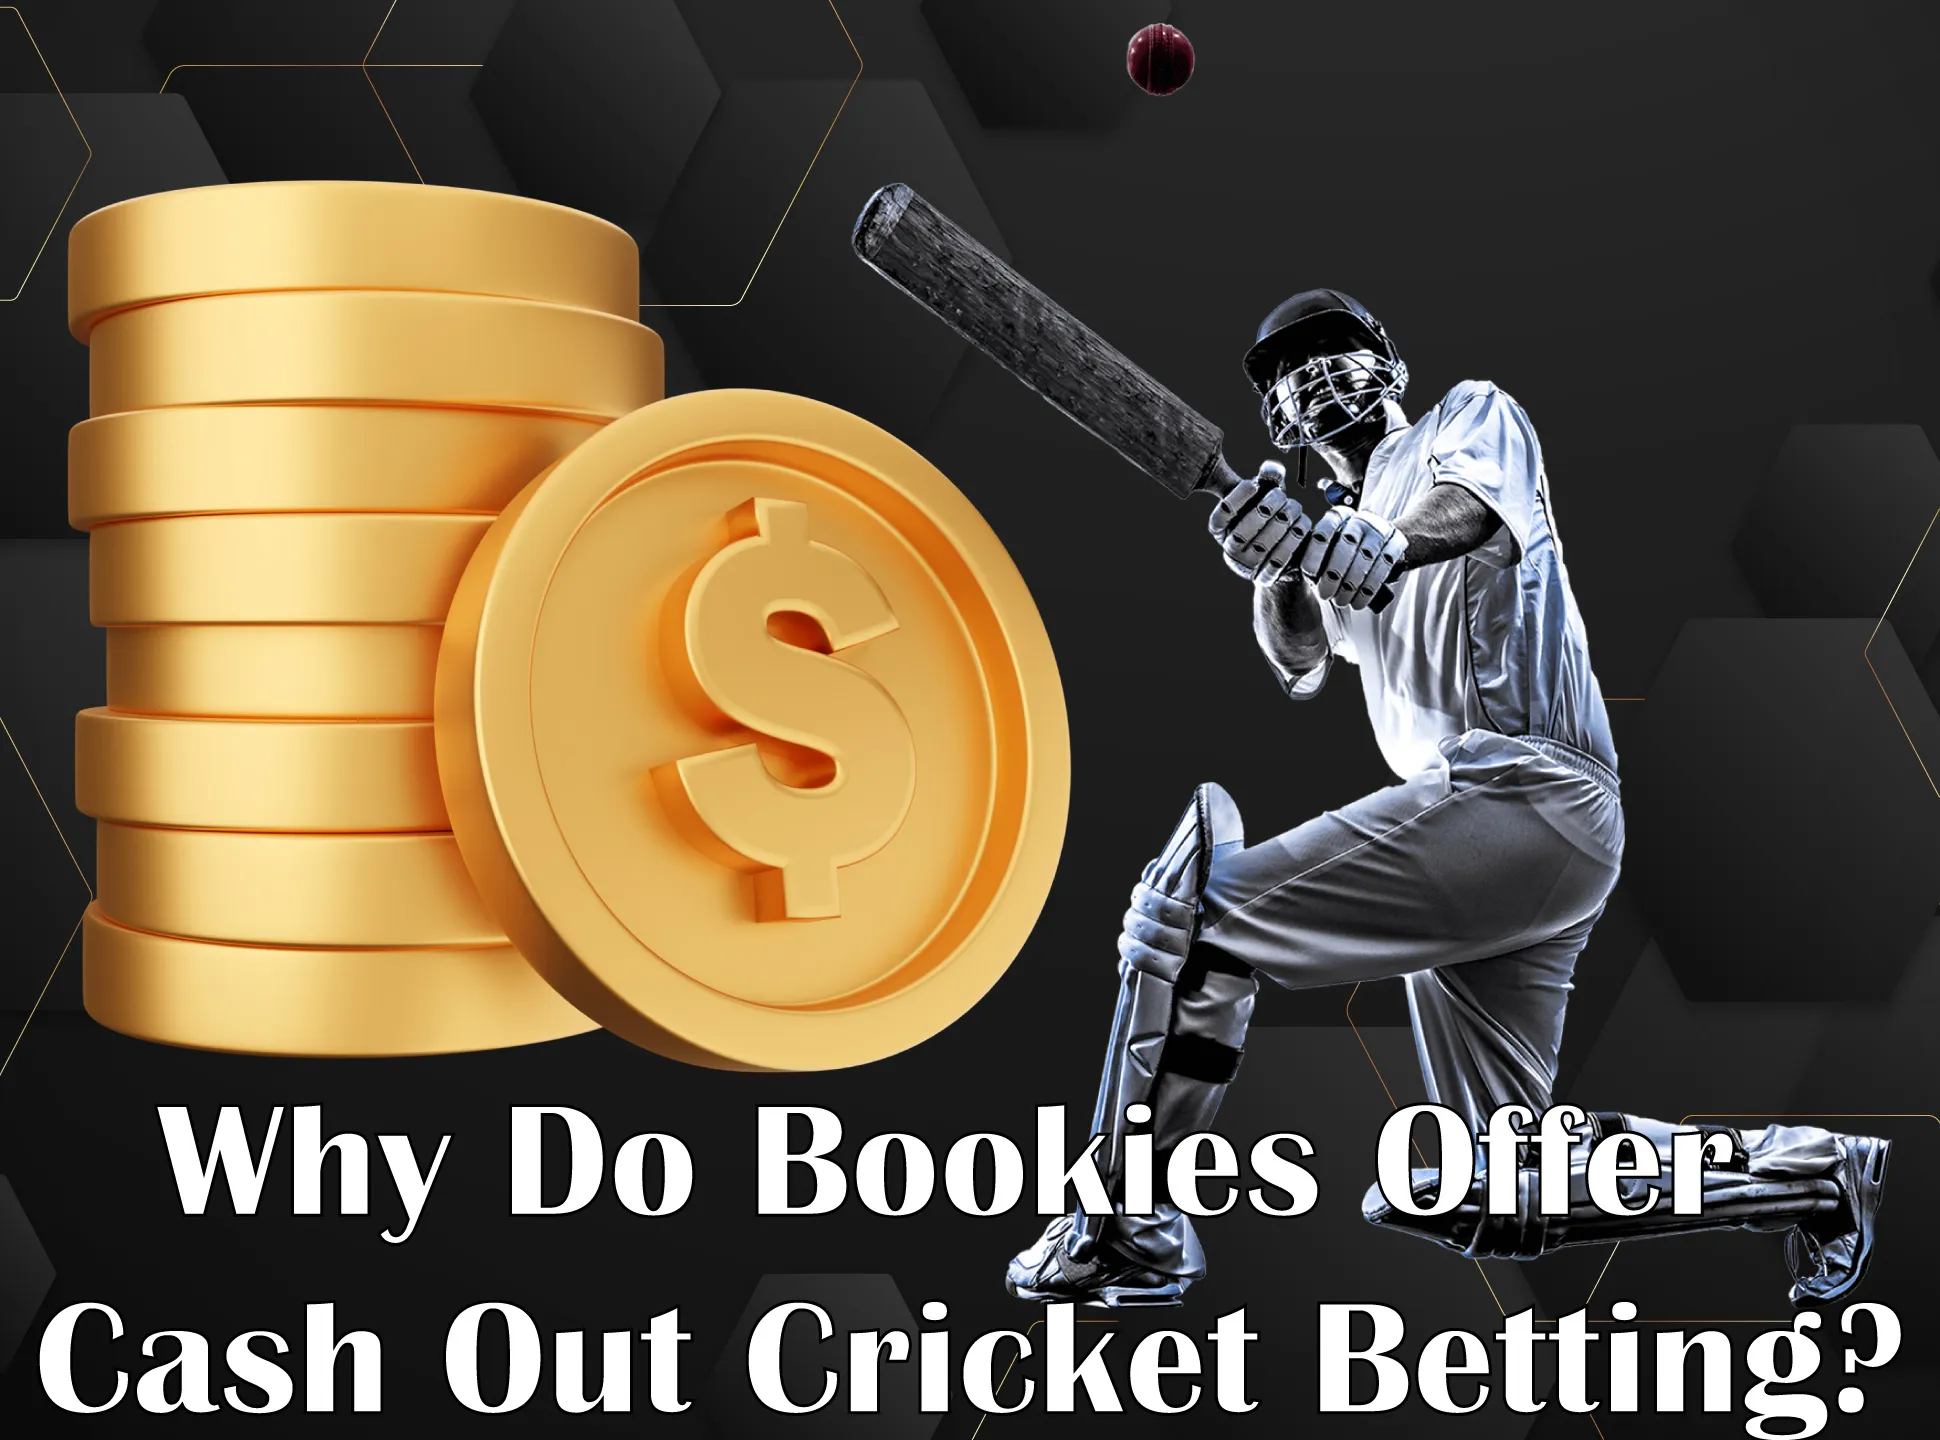 Cash out feature is profitable for both player and bookmaker.